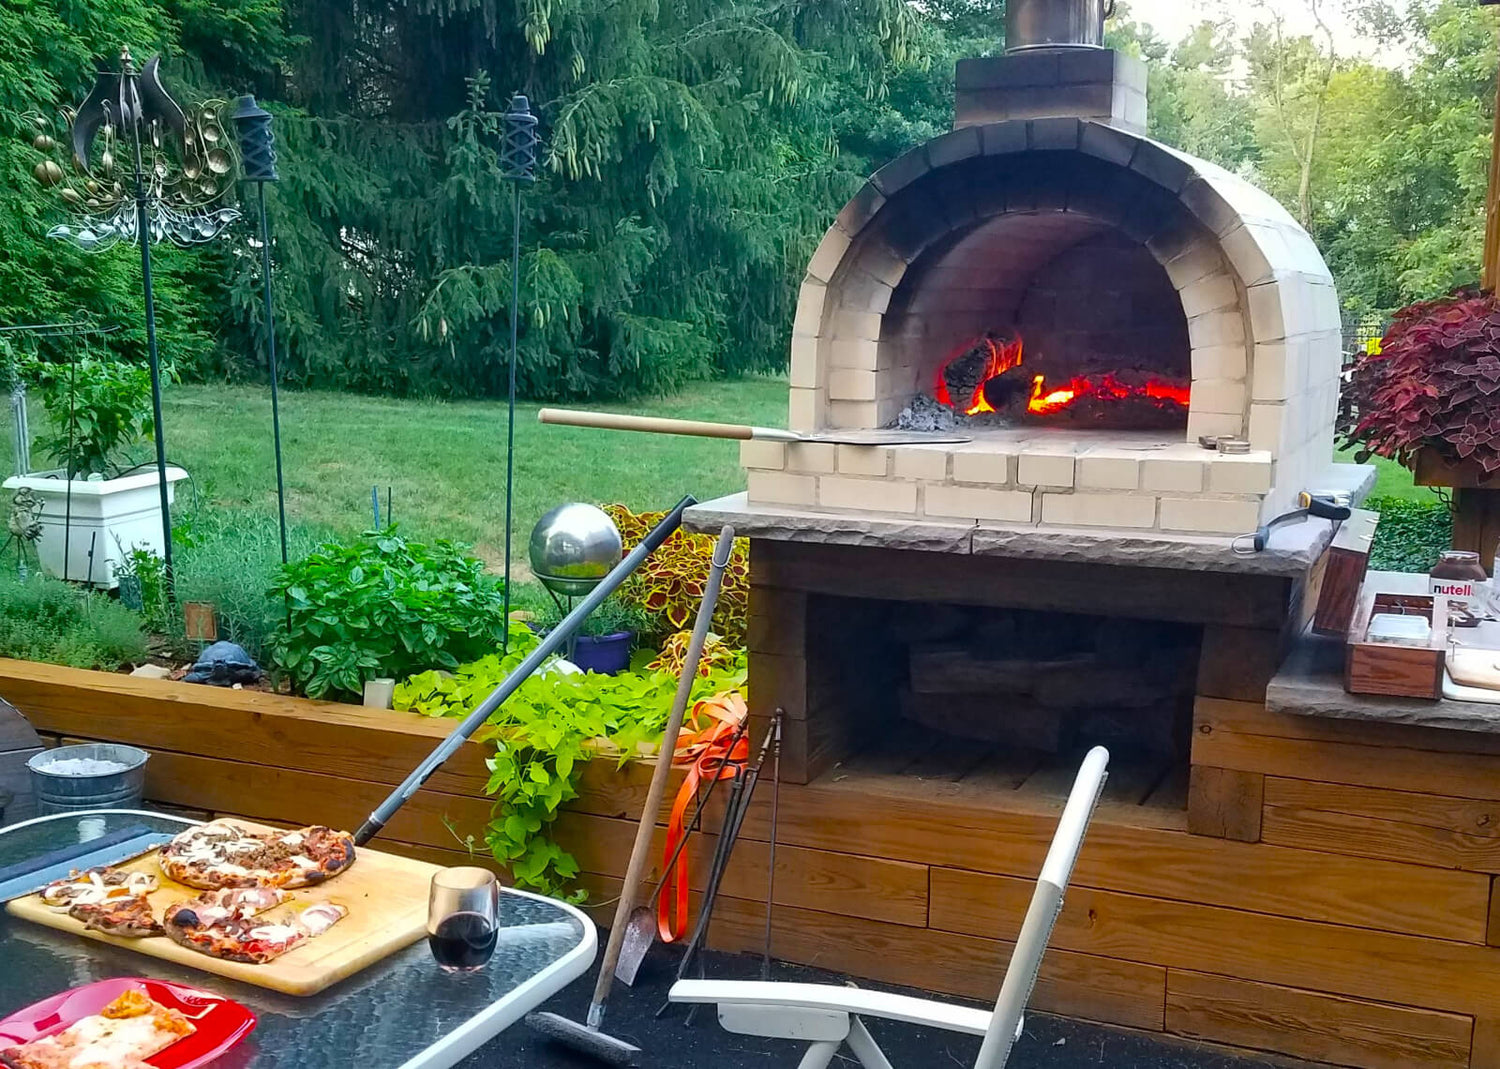 https://cdn.shopify.com/s/files/1/0568/6758/6256/t/9/assets/how-to-make-wood-fired-pizza-oven-9-tCq_1500x.jpg?v=1669078667